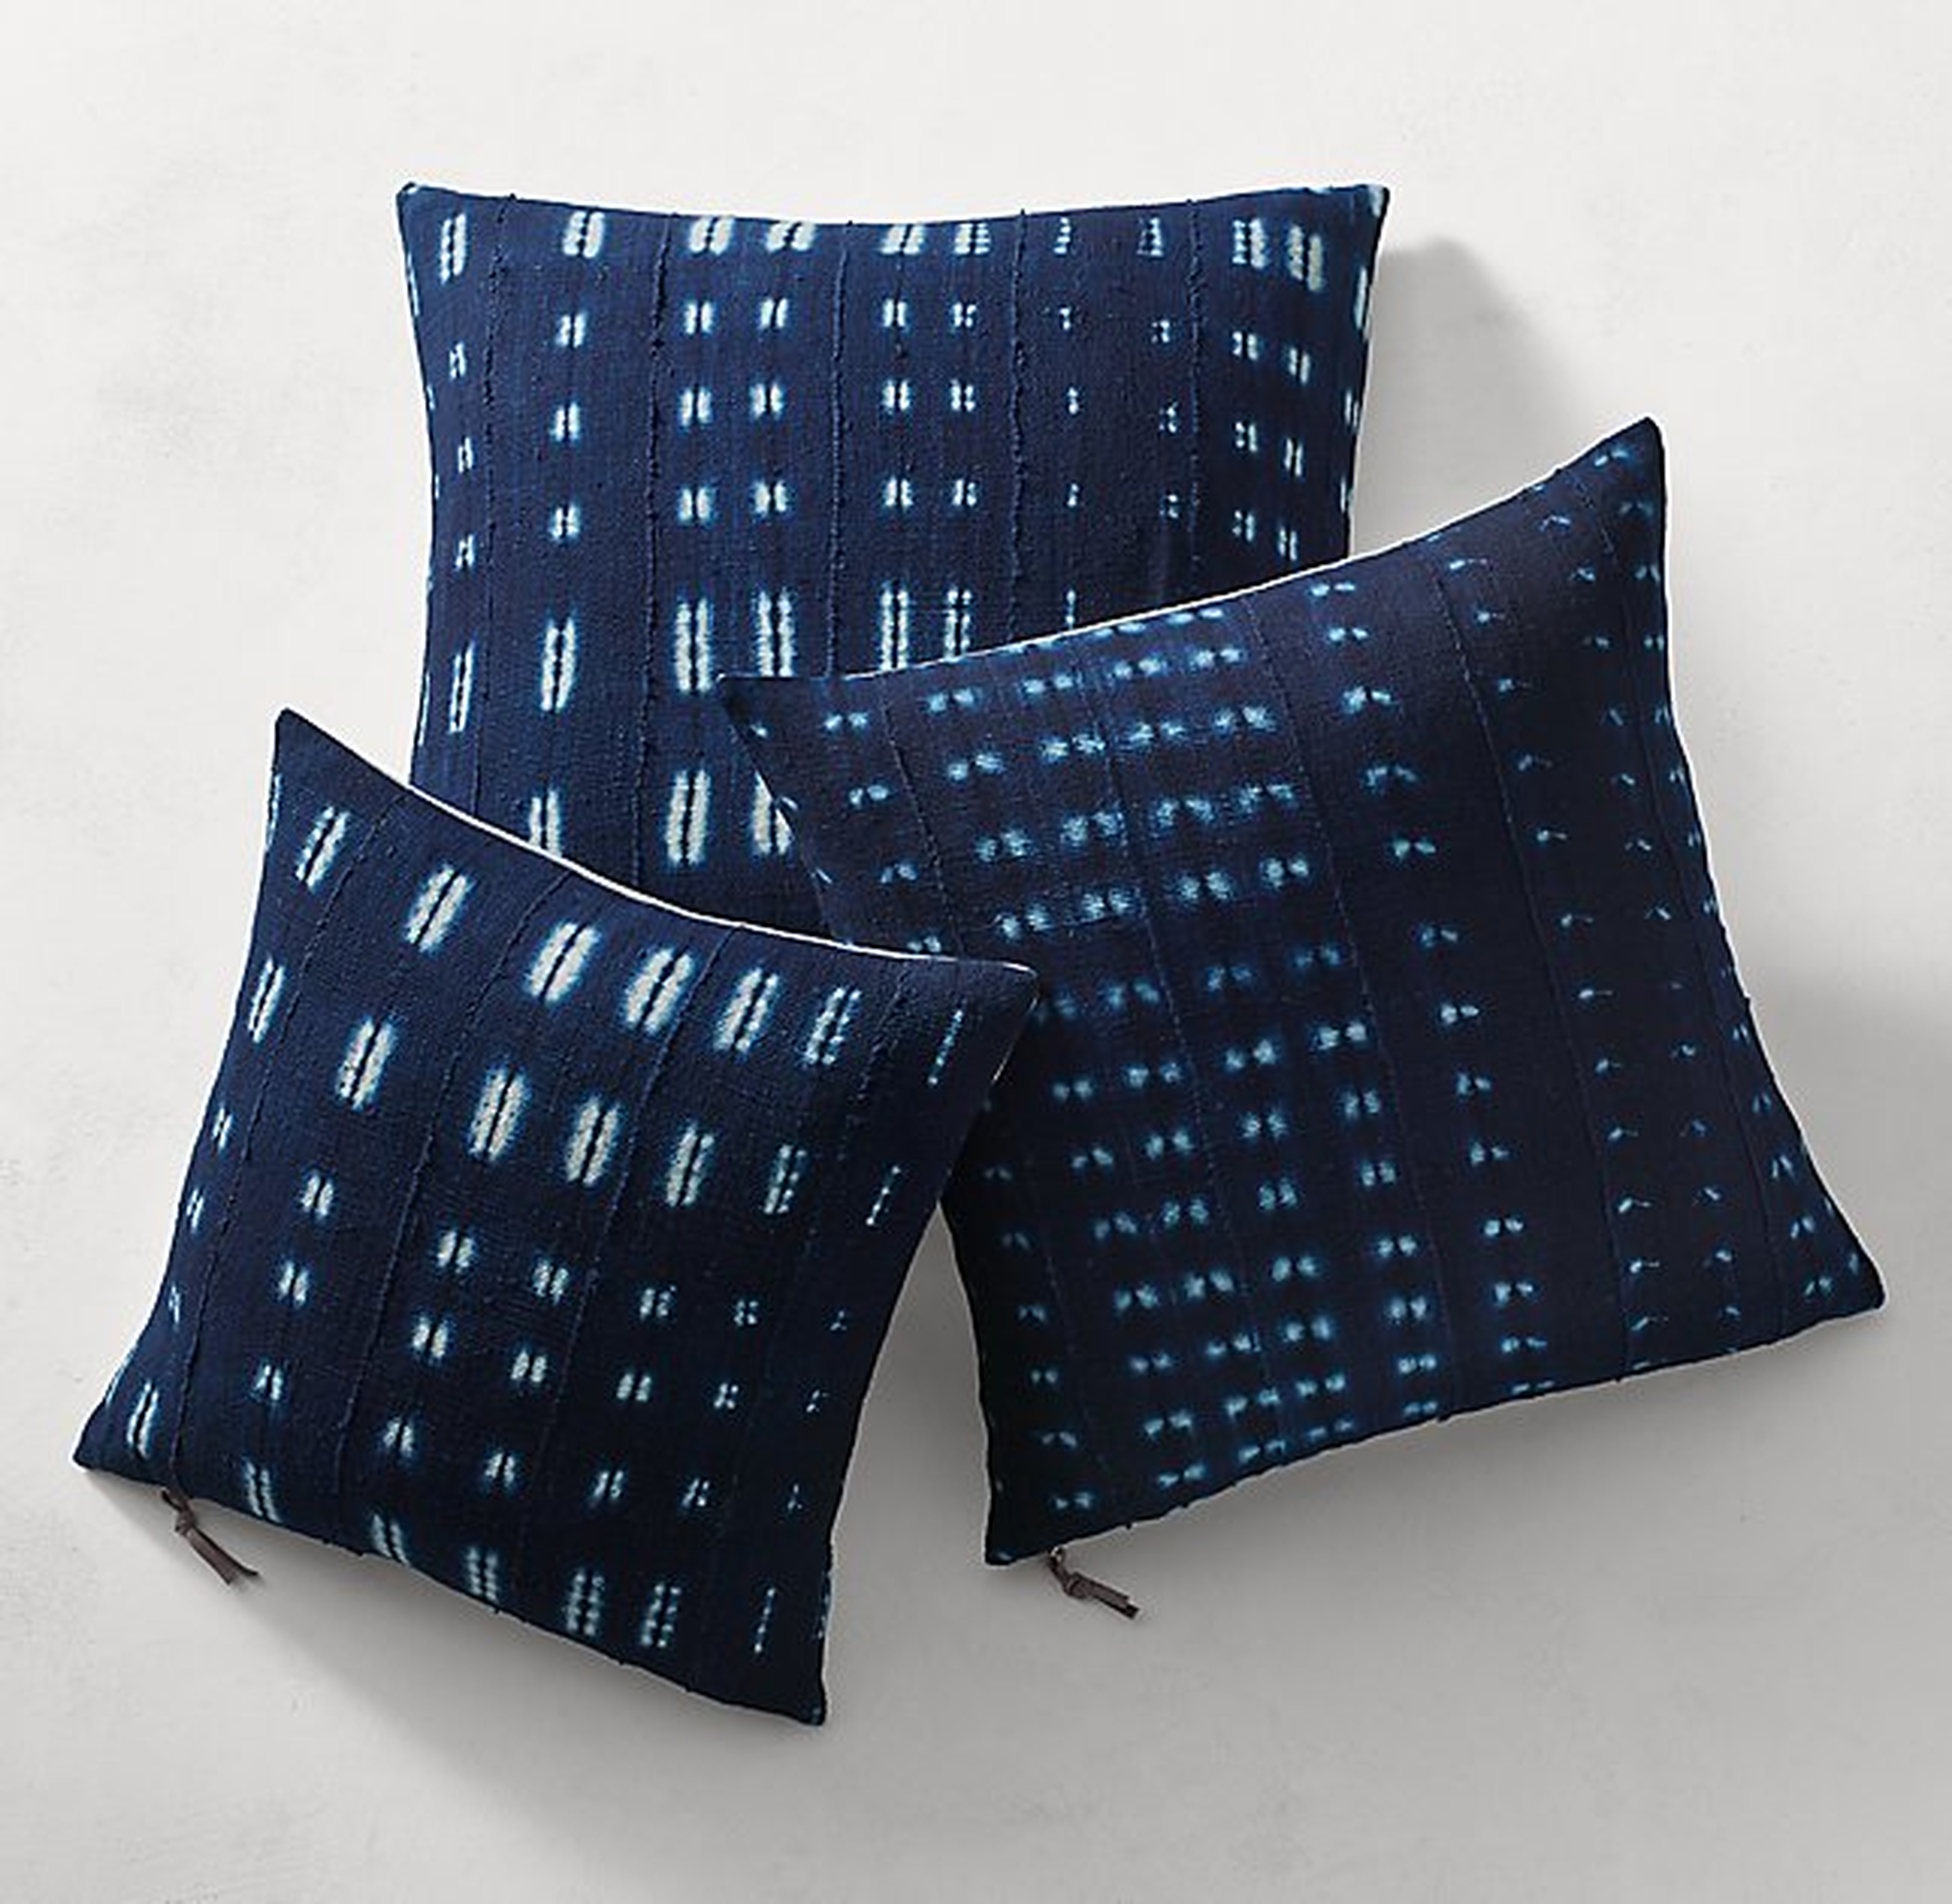 HANDCRAFTED AFRICAN INDIGO SHIBORI VARIED PATTERN SQUARE PILLOW COVER - 26x26 - RH